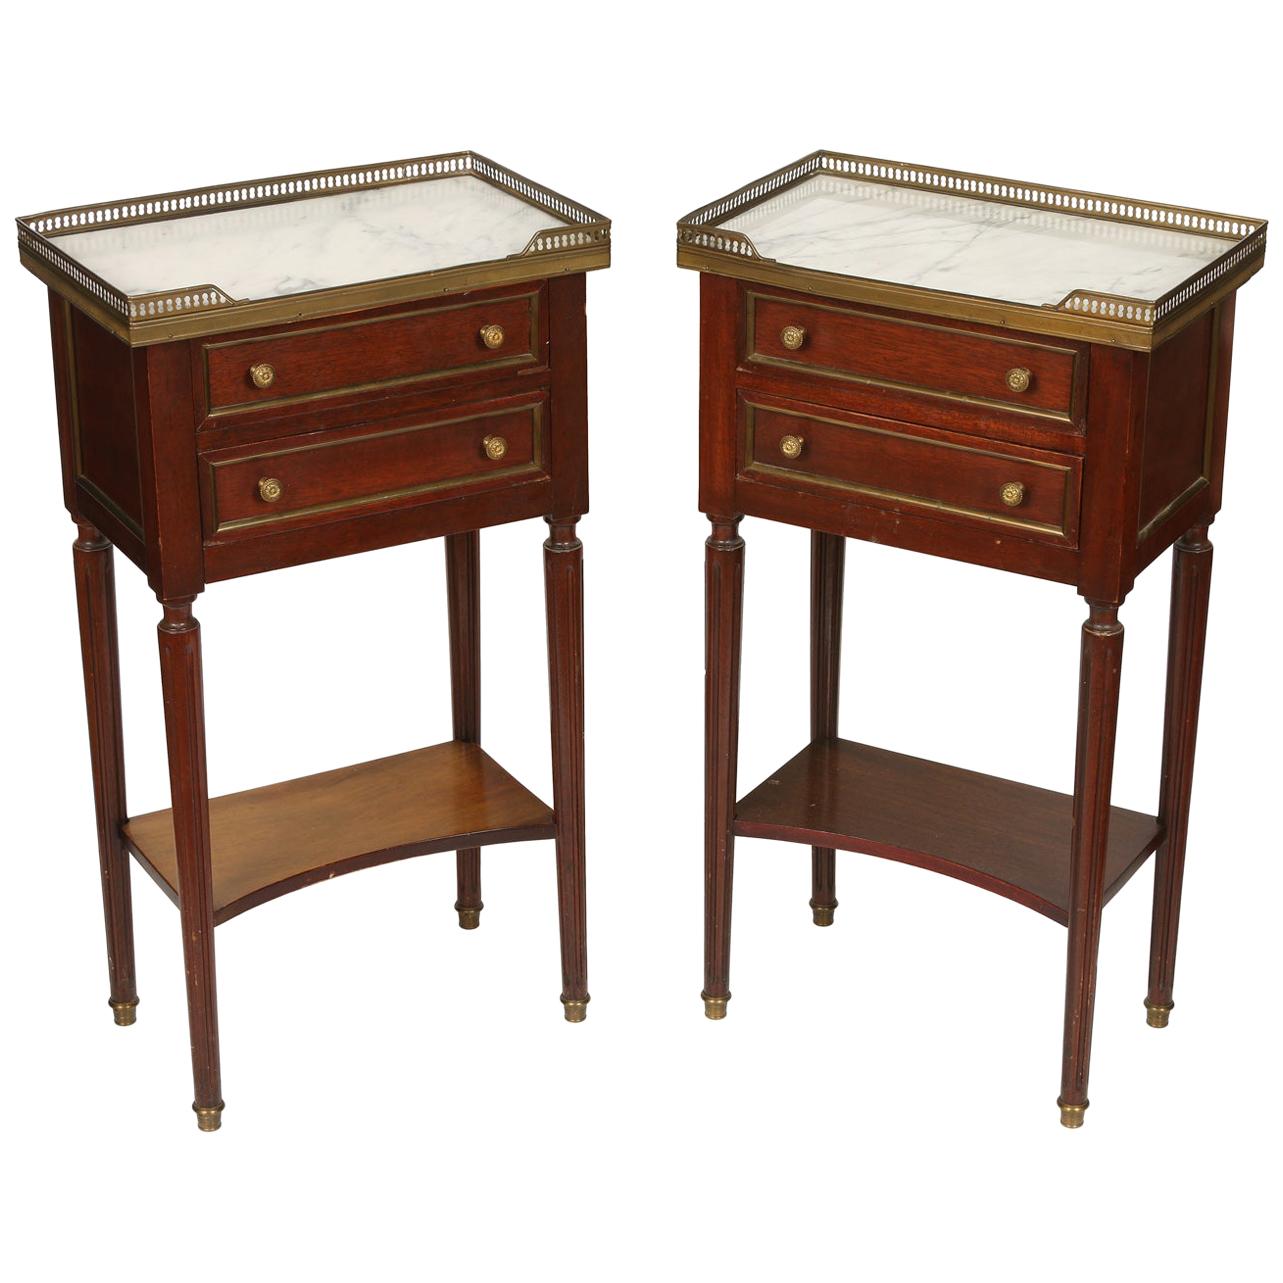 Pair of Louis XVI Style Marble Top Nightstands with Pierced Brass Gallery